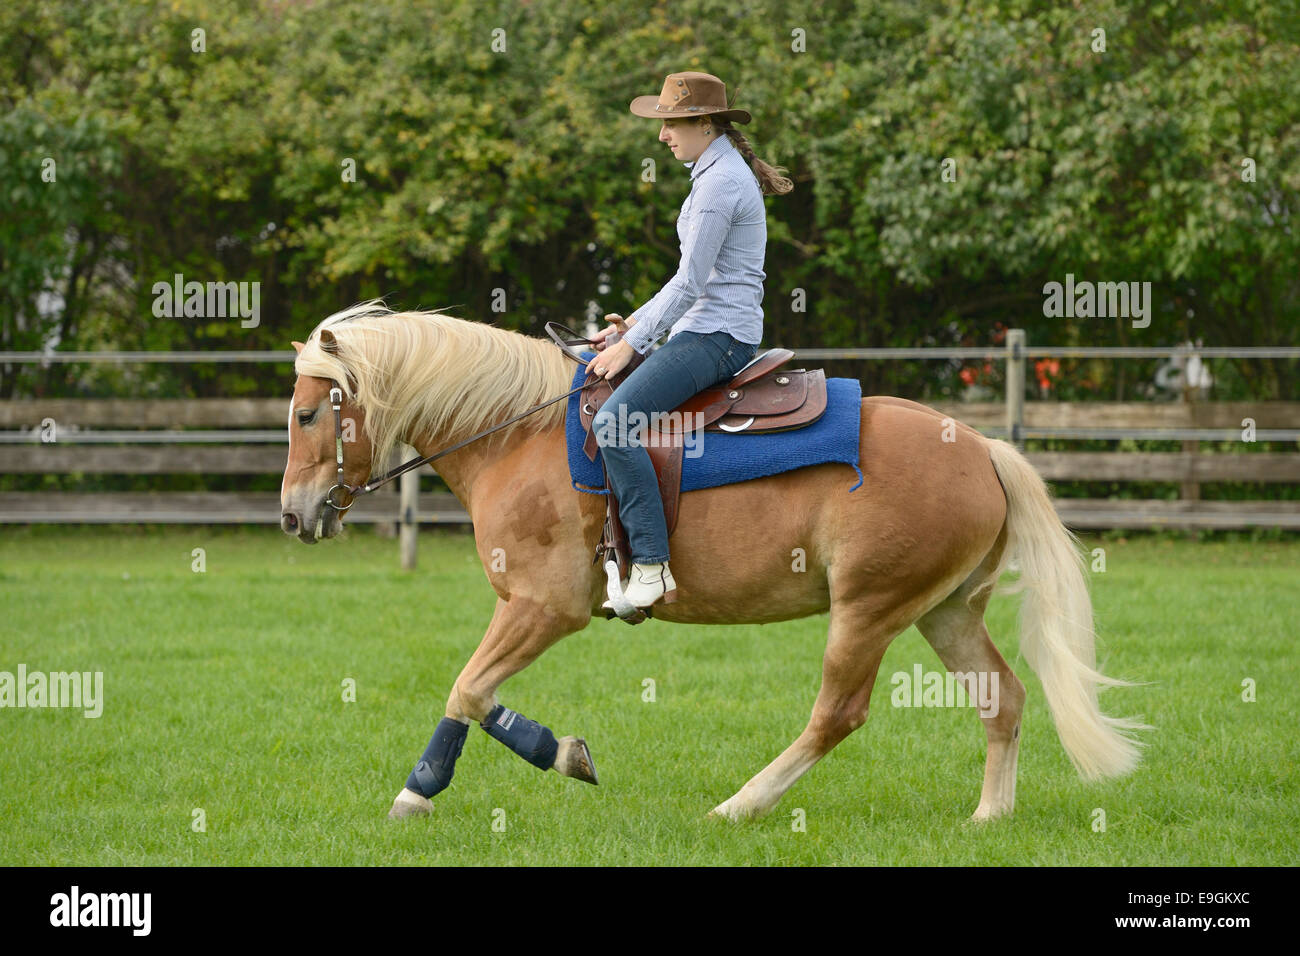 Rider on back of Haflinger horse cantering Stock Photo